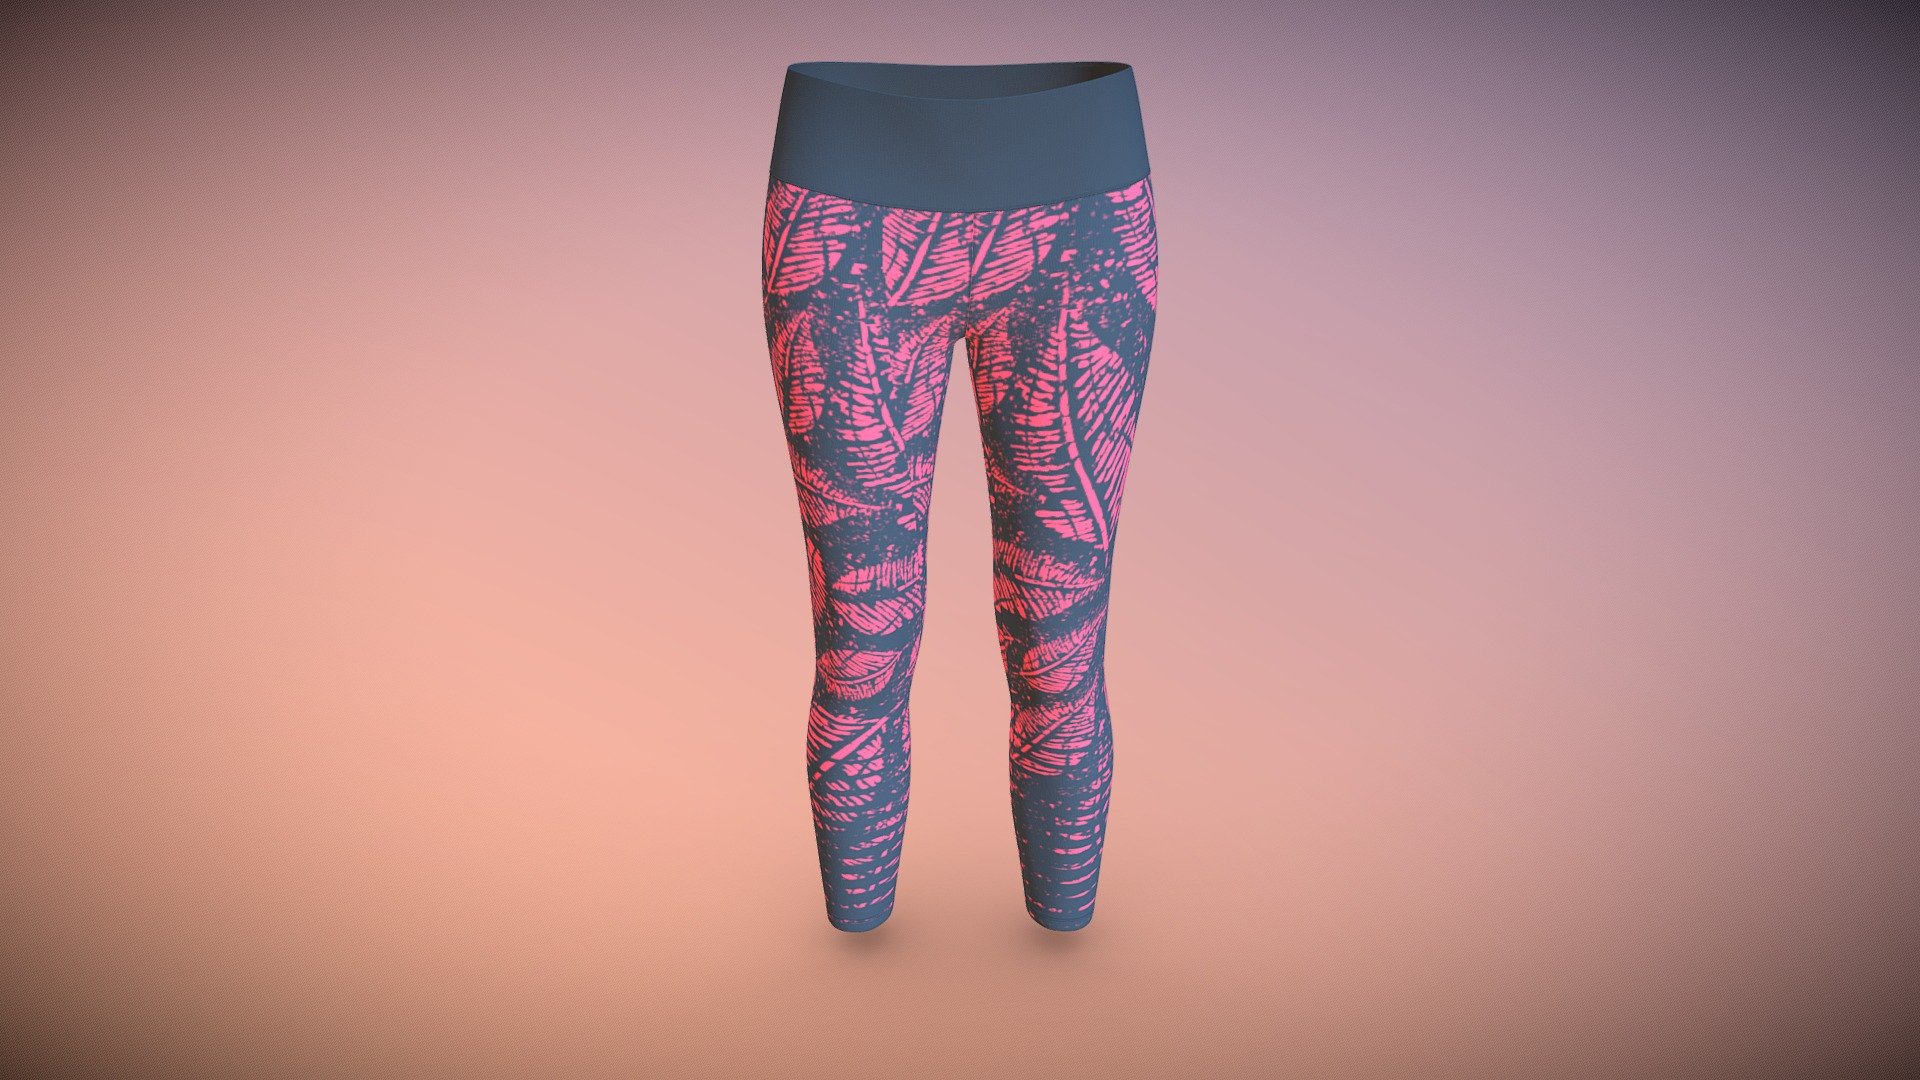 Cloth Title = Women's Leggings Design 

SKU = DG100136 

Category = Women 

Product Type = Leggings 

Cloth Length = Regular 

Body Fit = Skinny Fit 

Occasion = Activewear  

Waist Rise = Mid Rise 


Our Services:

3D Apparel Design.

OBJ,FBX,GLTF Making with High/Low Poly.

Fabric Digitalization.

Mockup making.

3D Teck Pack.

Pattern Making.

2D Illustration.

Cloth Animation and 360 Spin Video.


Contact us:- 

Email: info@digitalfashionwear.com 

Website: https://digitalfashionwear.com 


We designed all the types of cloth specially focused on product visualization, e-commerce, fitting, and production. 

We will design: 

T-shirts 

Polo shirts 

Hoodies 

Sweatshirt 

Jackets 

Shirts 

TankTops 

Trousers 

Bras 

Underwear 

Blazer 

Aprons 

Leggings 

and All Fashion items. 





Our goal is to make sure what we provide you, meets your demand 3d model